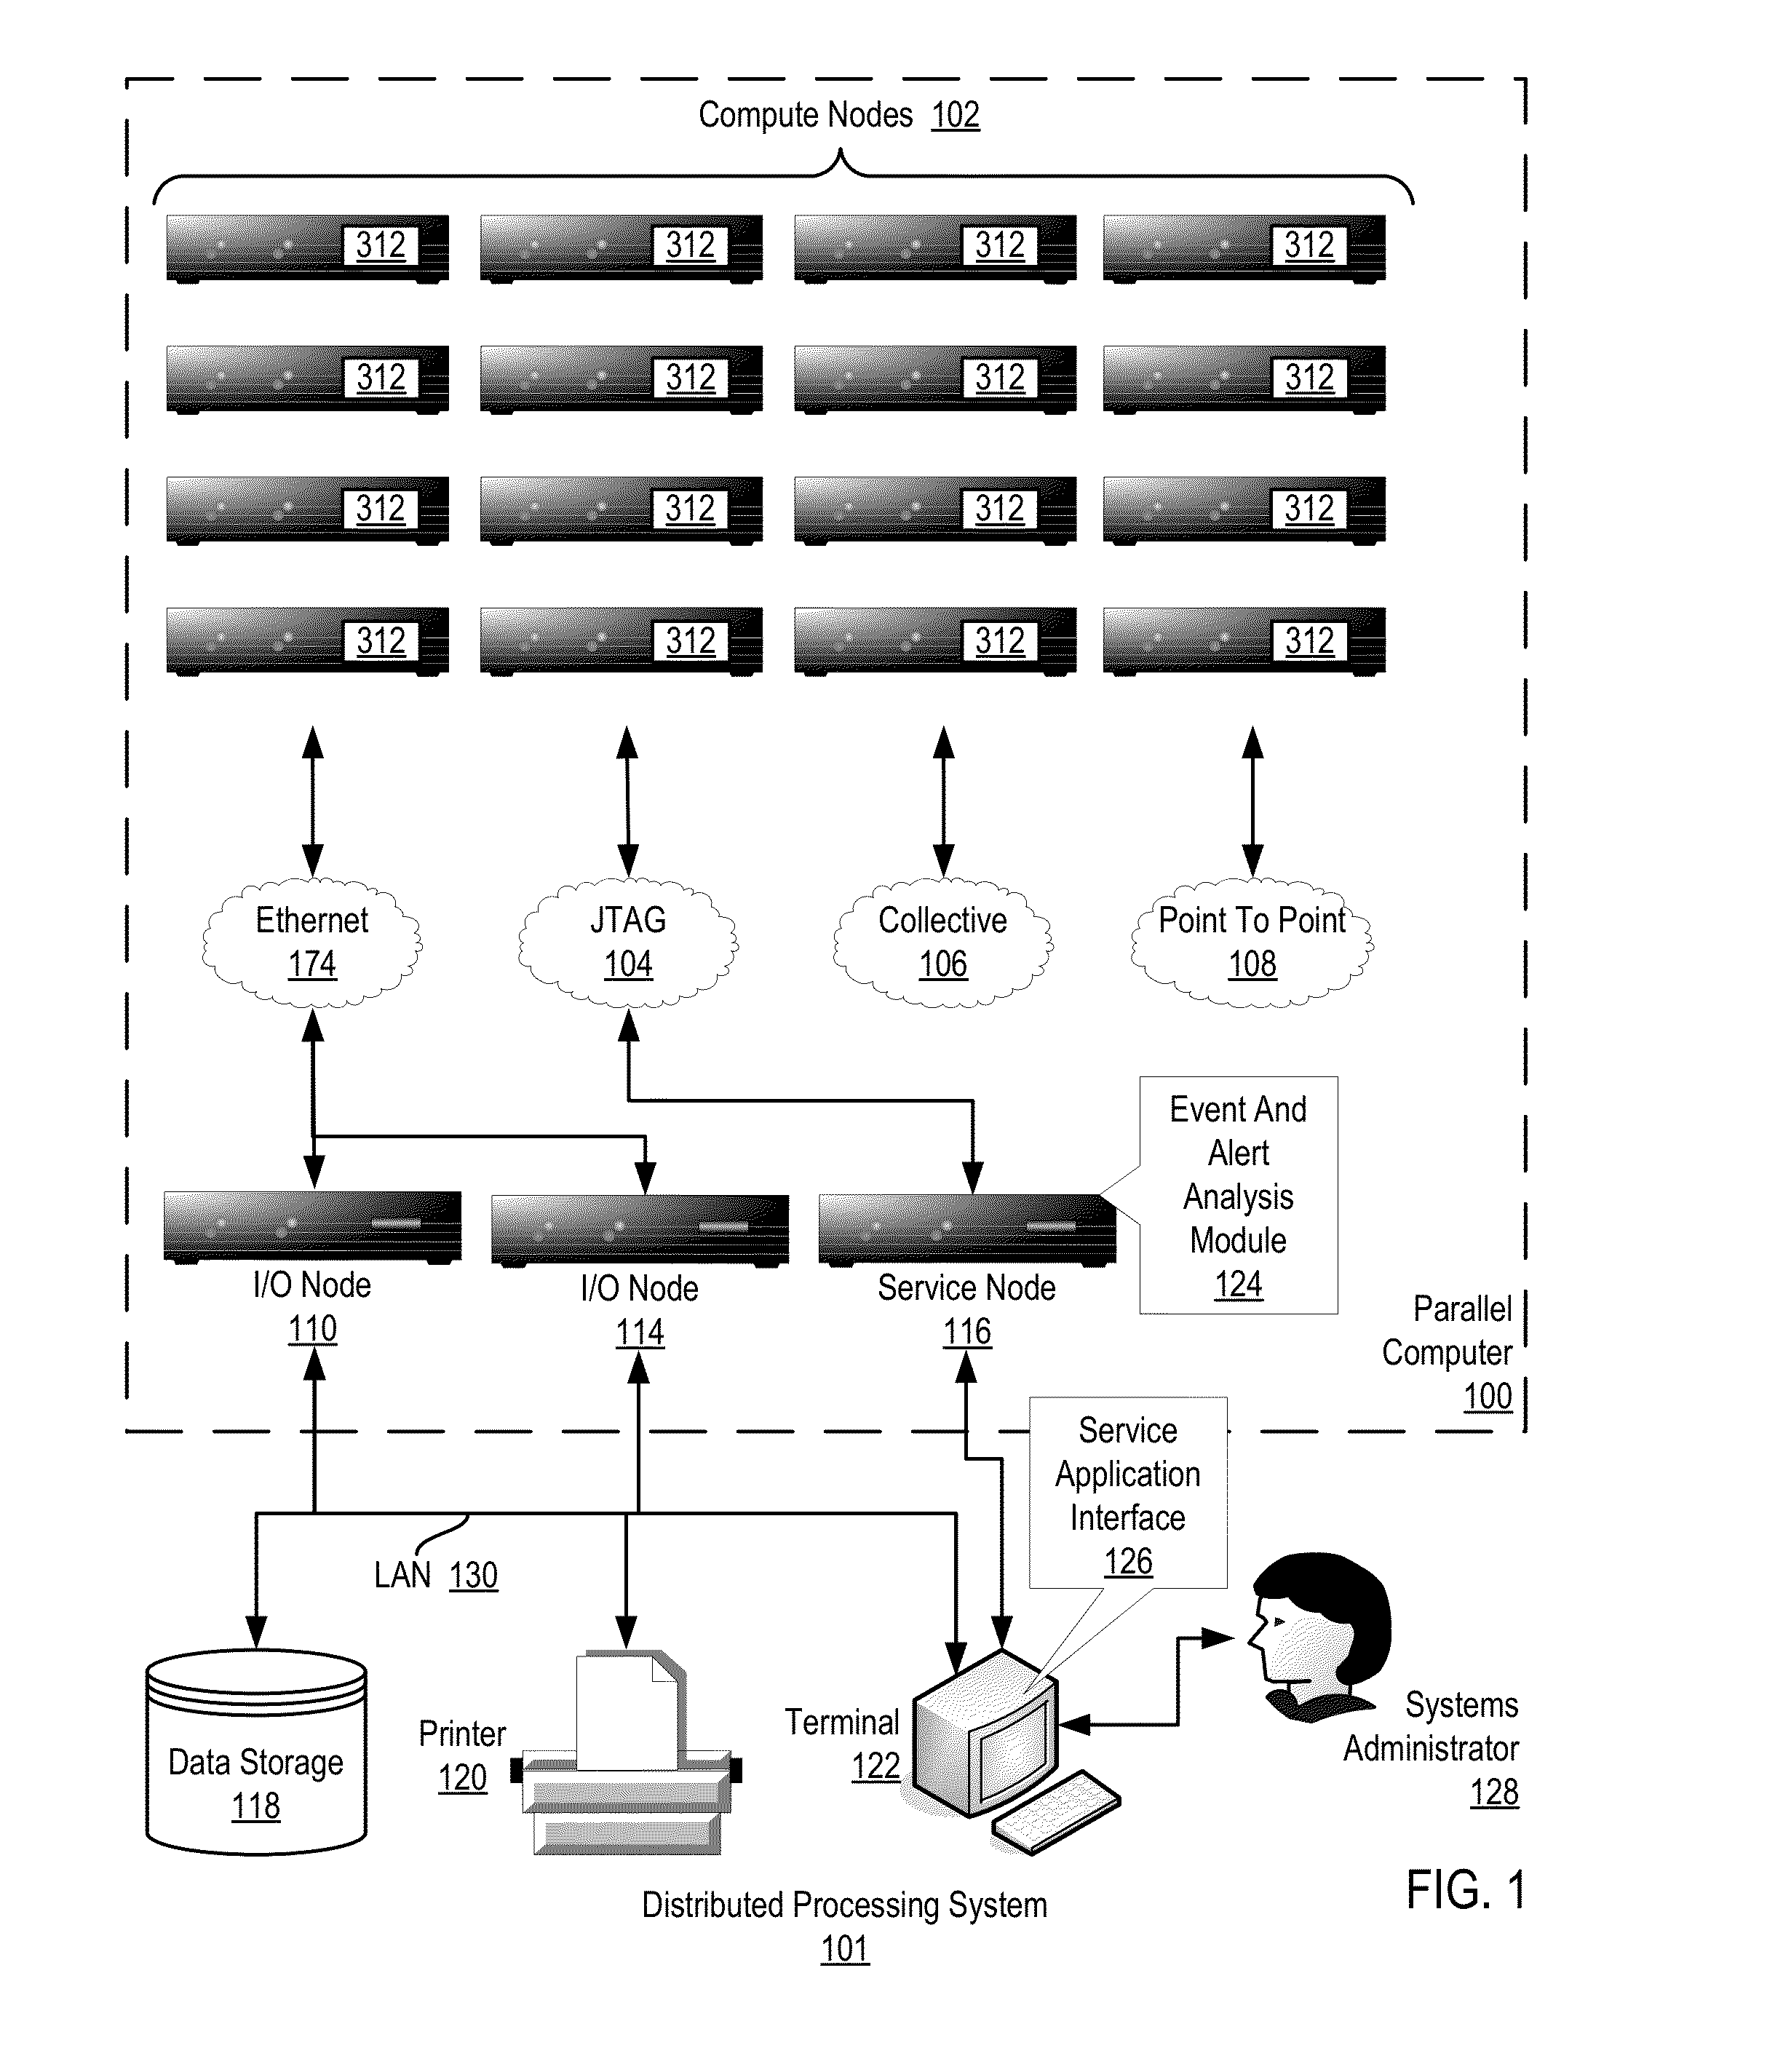 Restarting event and alert analysis after a shutdown in a distributed processing system